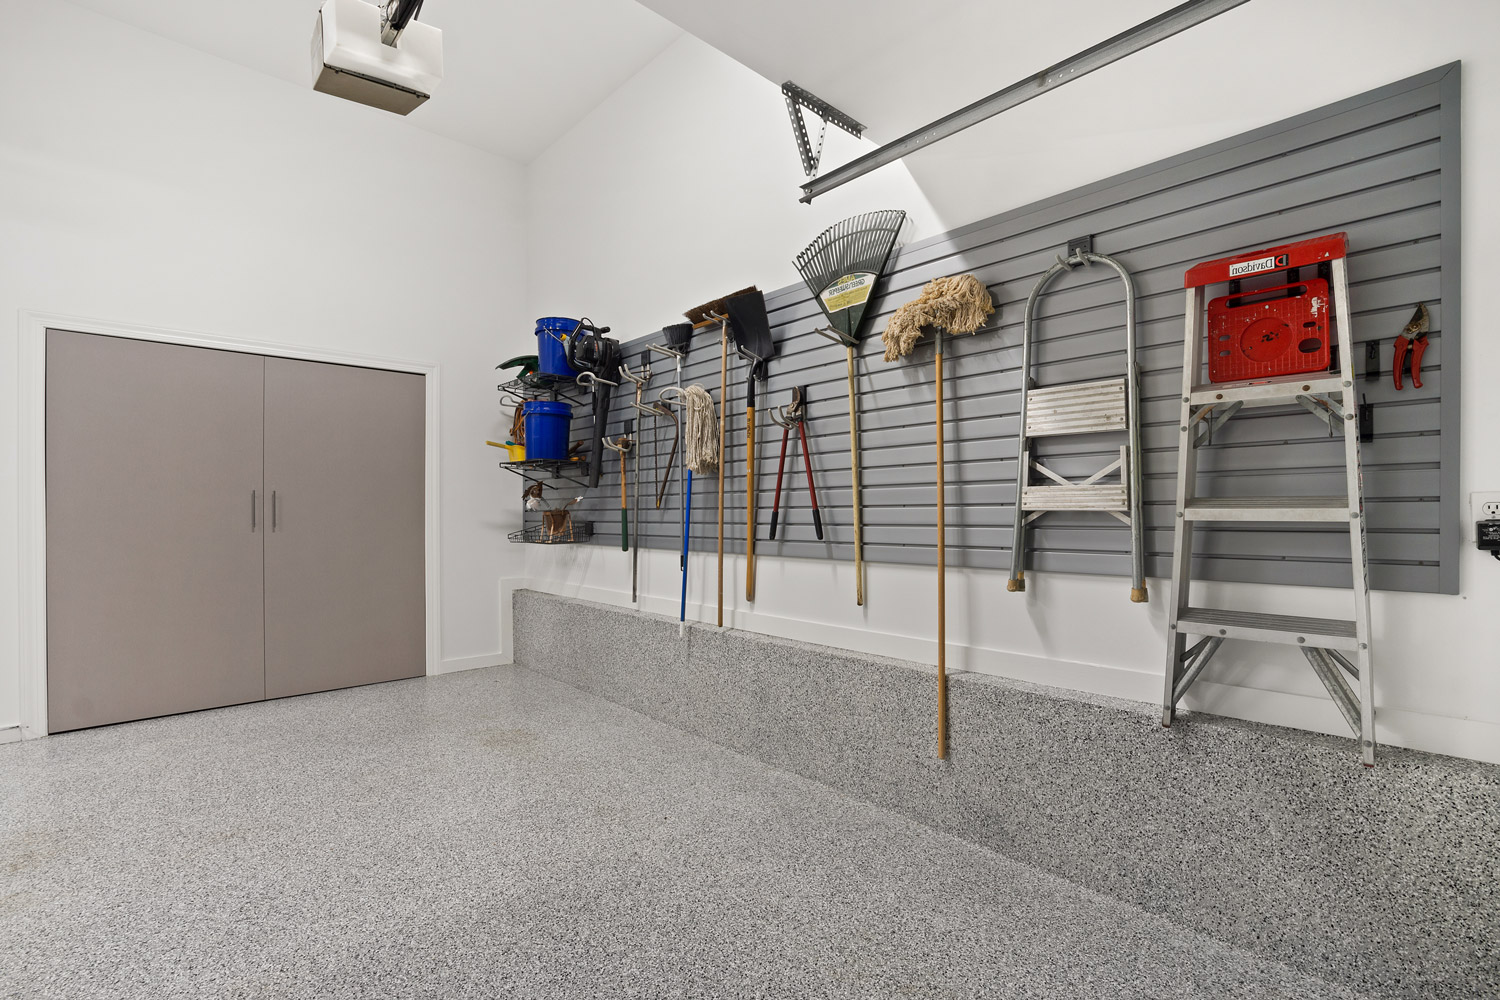 Slatwall Accessories Will Solve Your Garage Clutter Problem